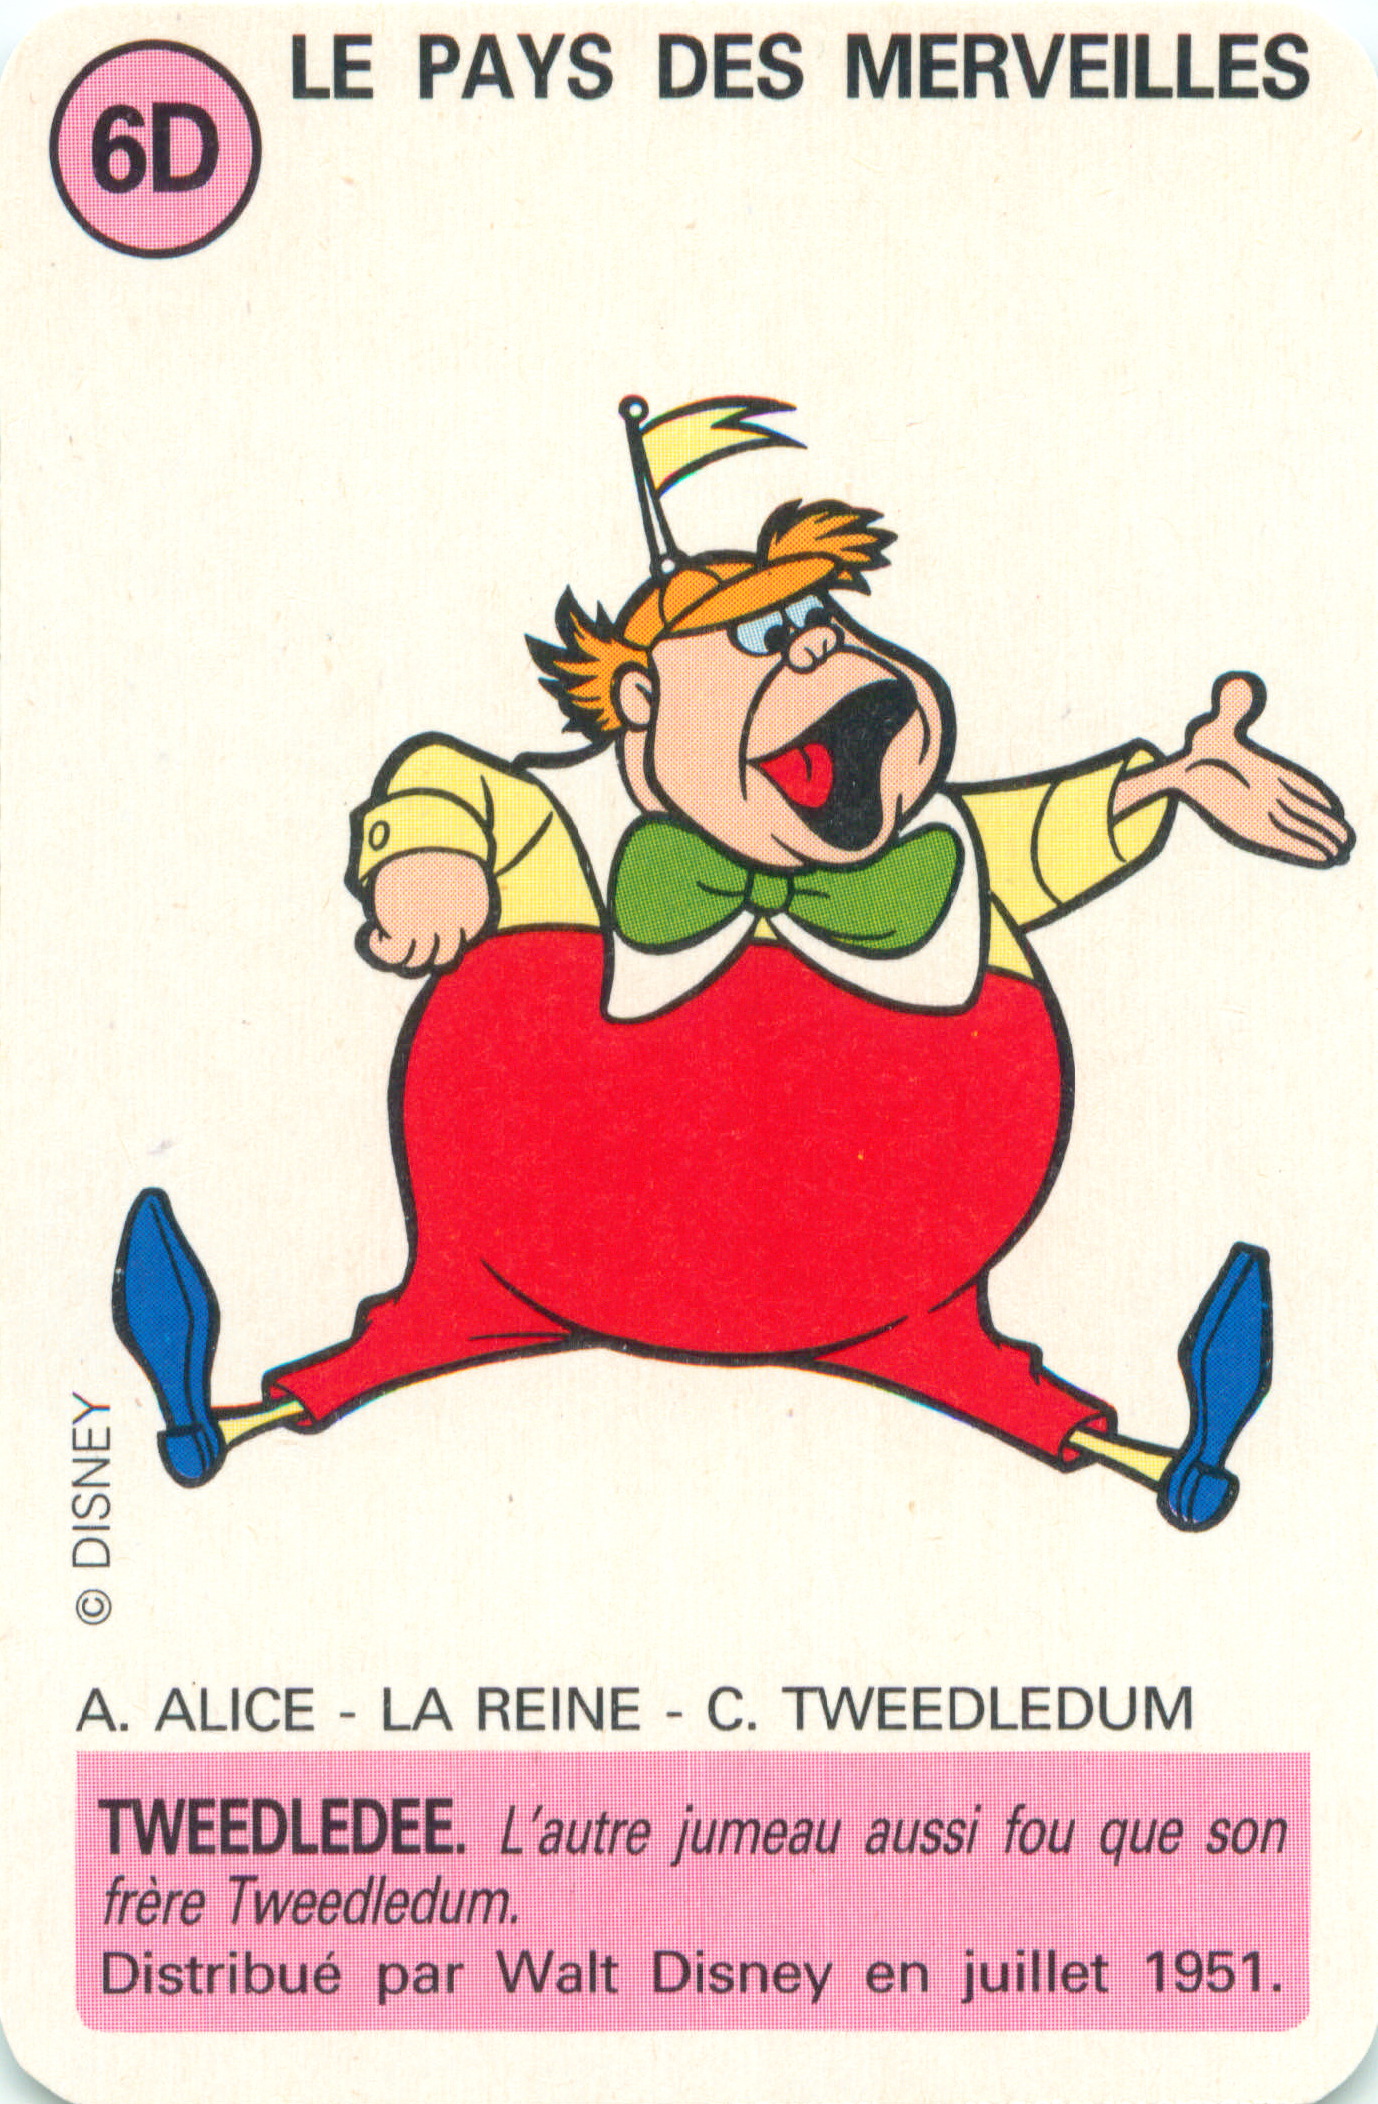 the card shows the character of an animated character